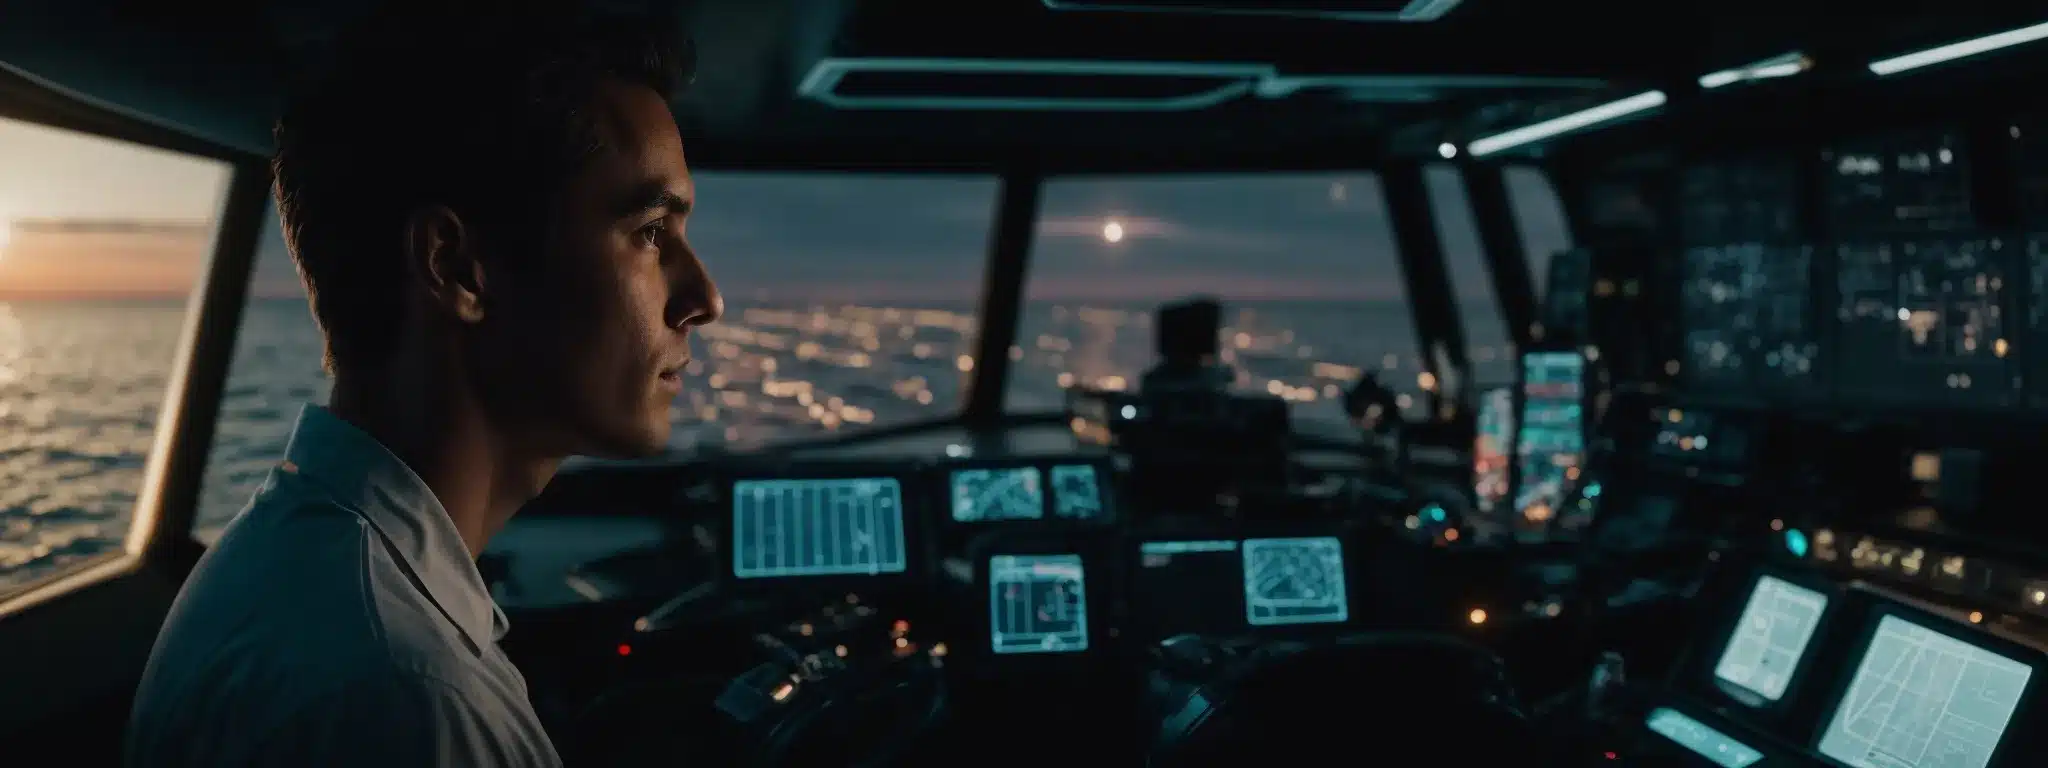 A Captain Confidently Stands At The Helm Of A Ship, Gazing At A Complex Dashboard Aglow With Navigational Screens And Charts Under A Starlit Sky.